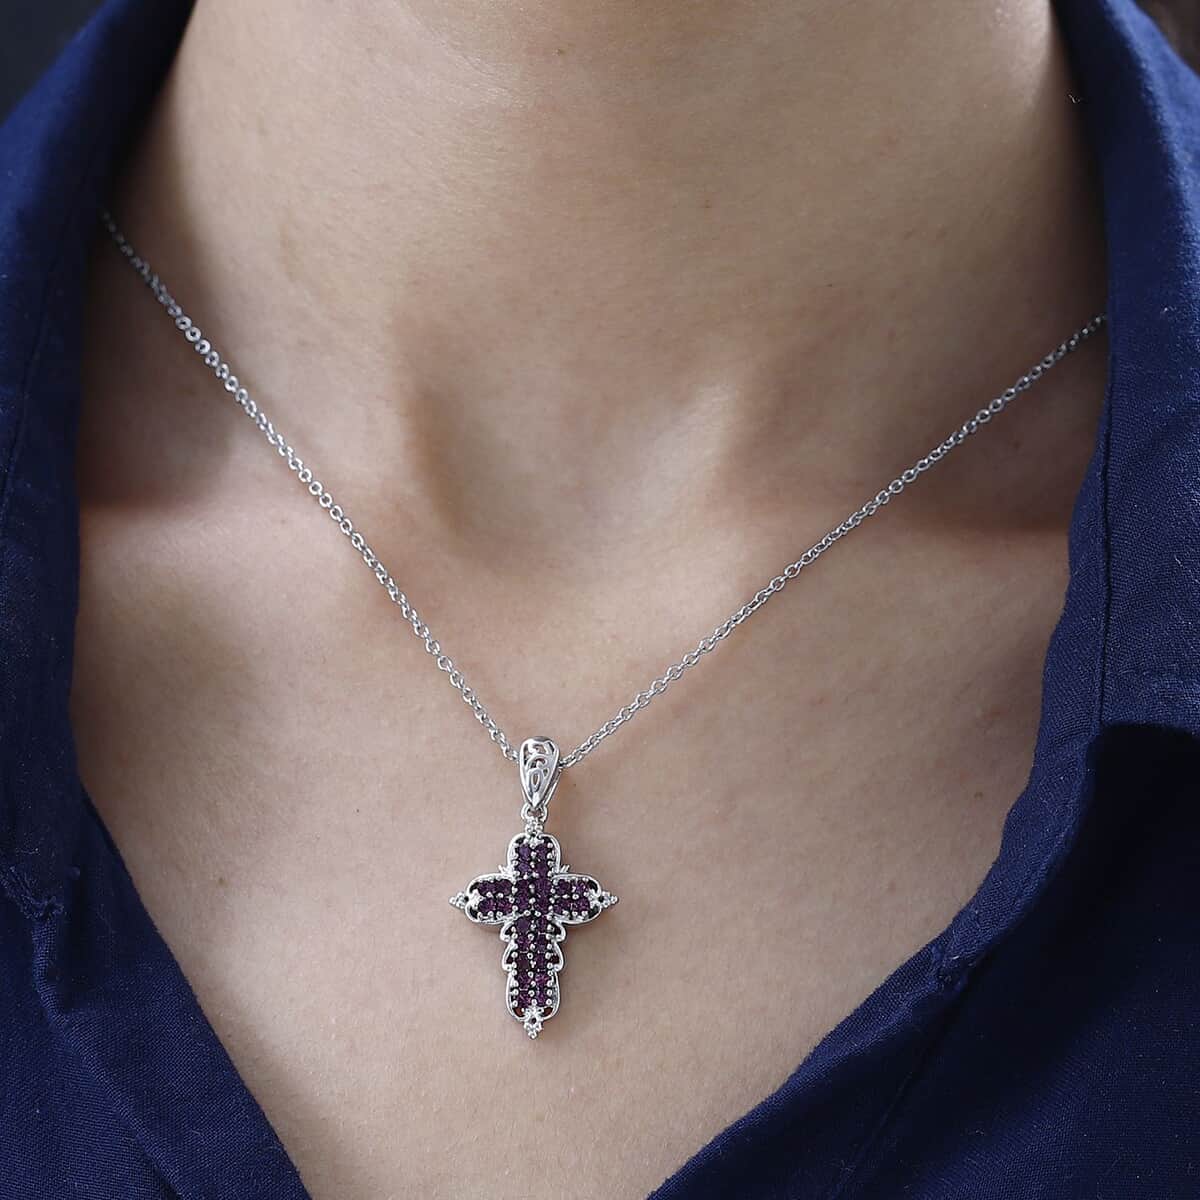 Designer Premium Foilback Amethyst Color Austrian Crystal Cross Pendant in Platinum Over Copper with Stainless Steel Necklace 20 Inches image number 2